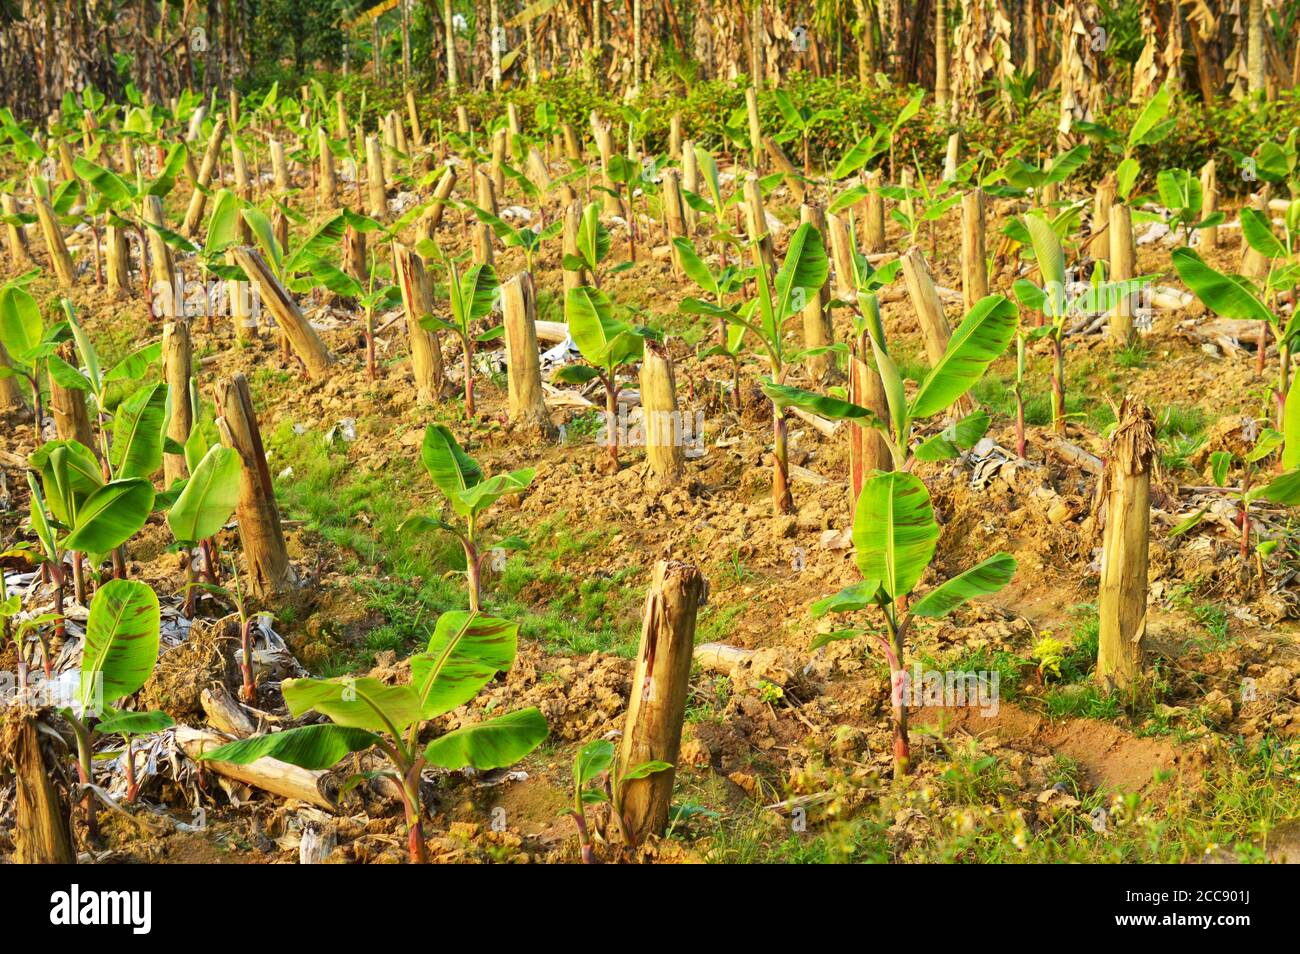 Banana plants may grow with varying degrees of success in diverse climatic conditions. Stock Photo